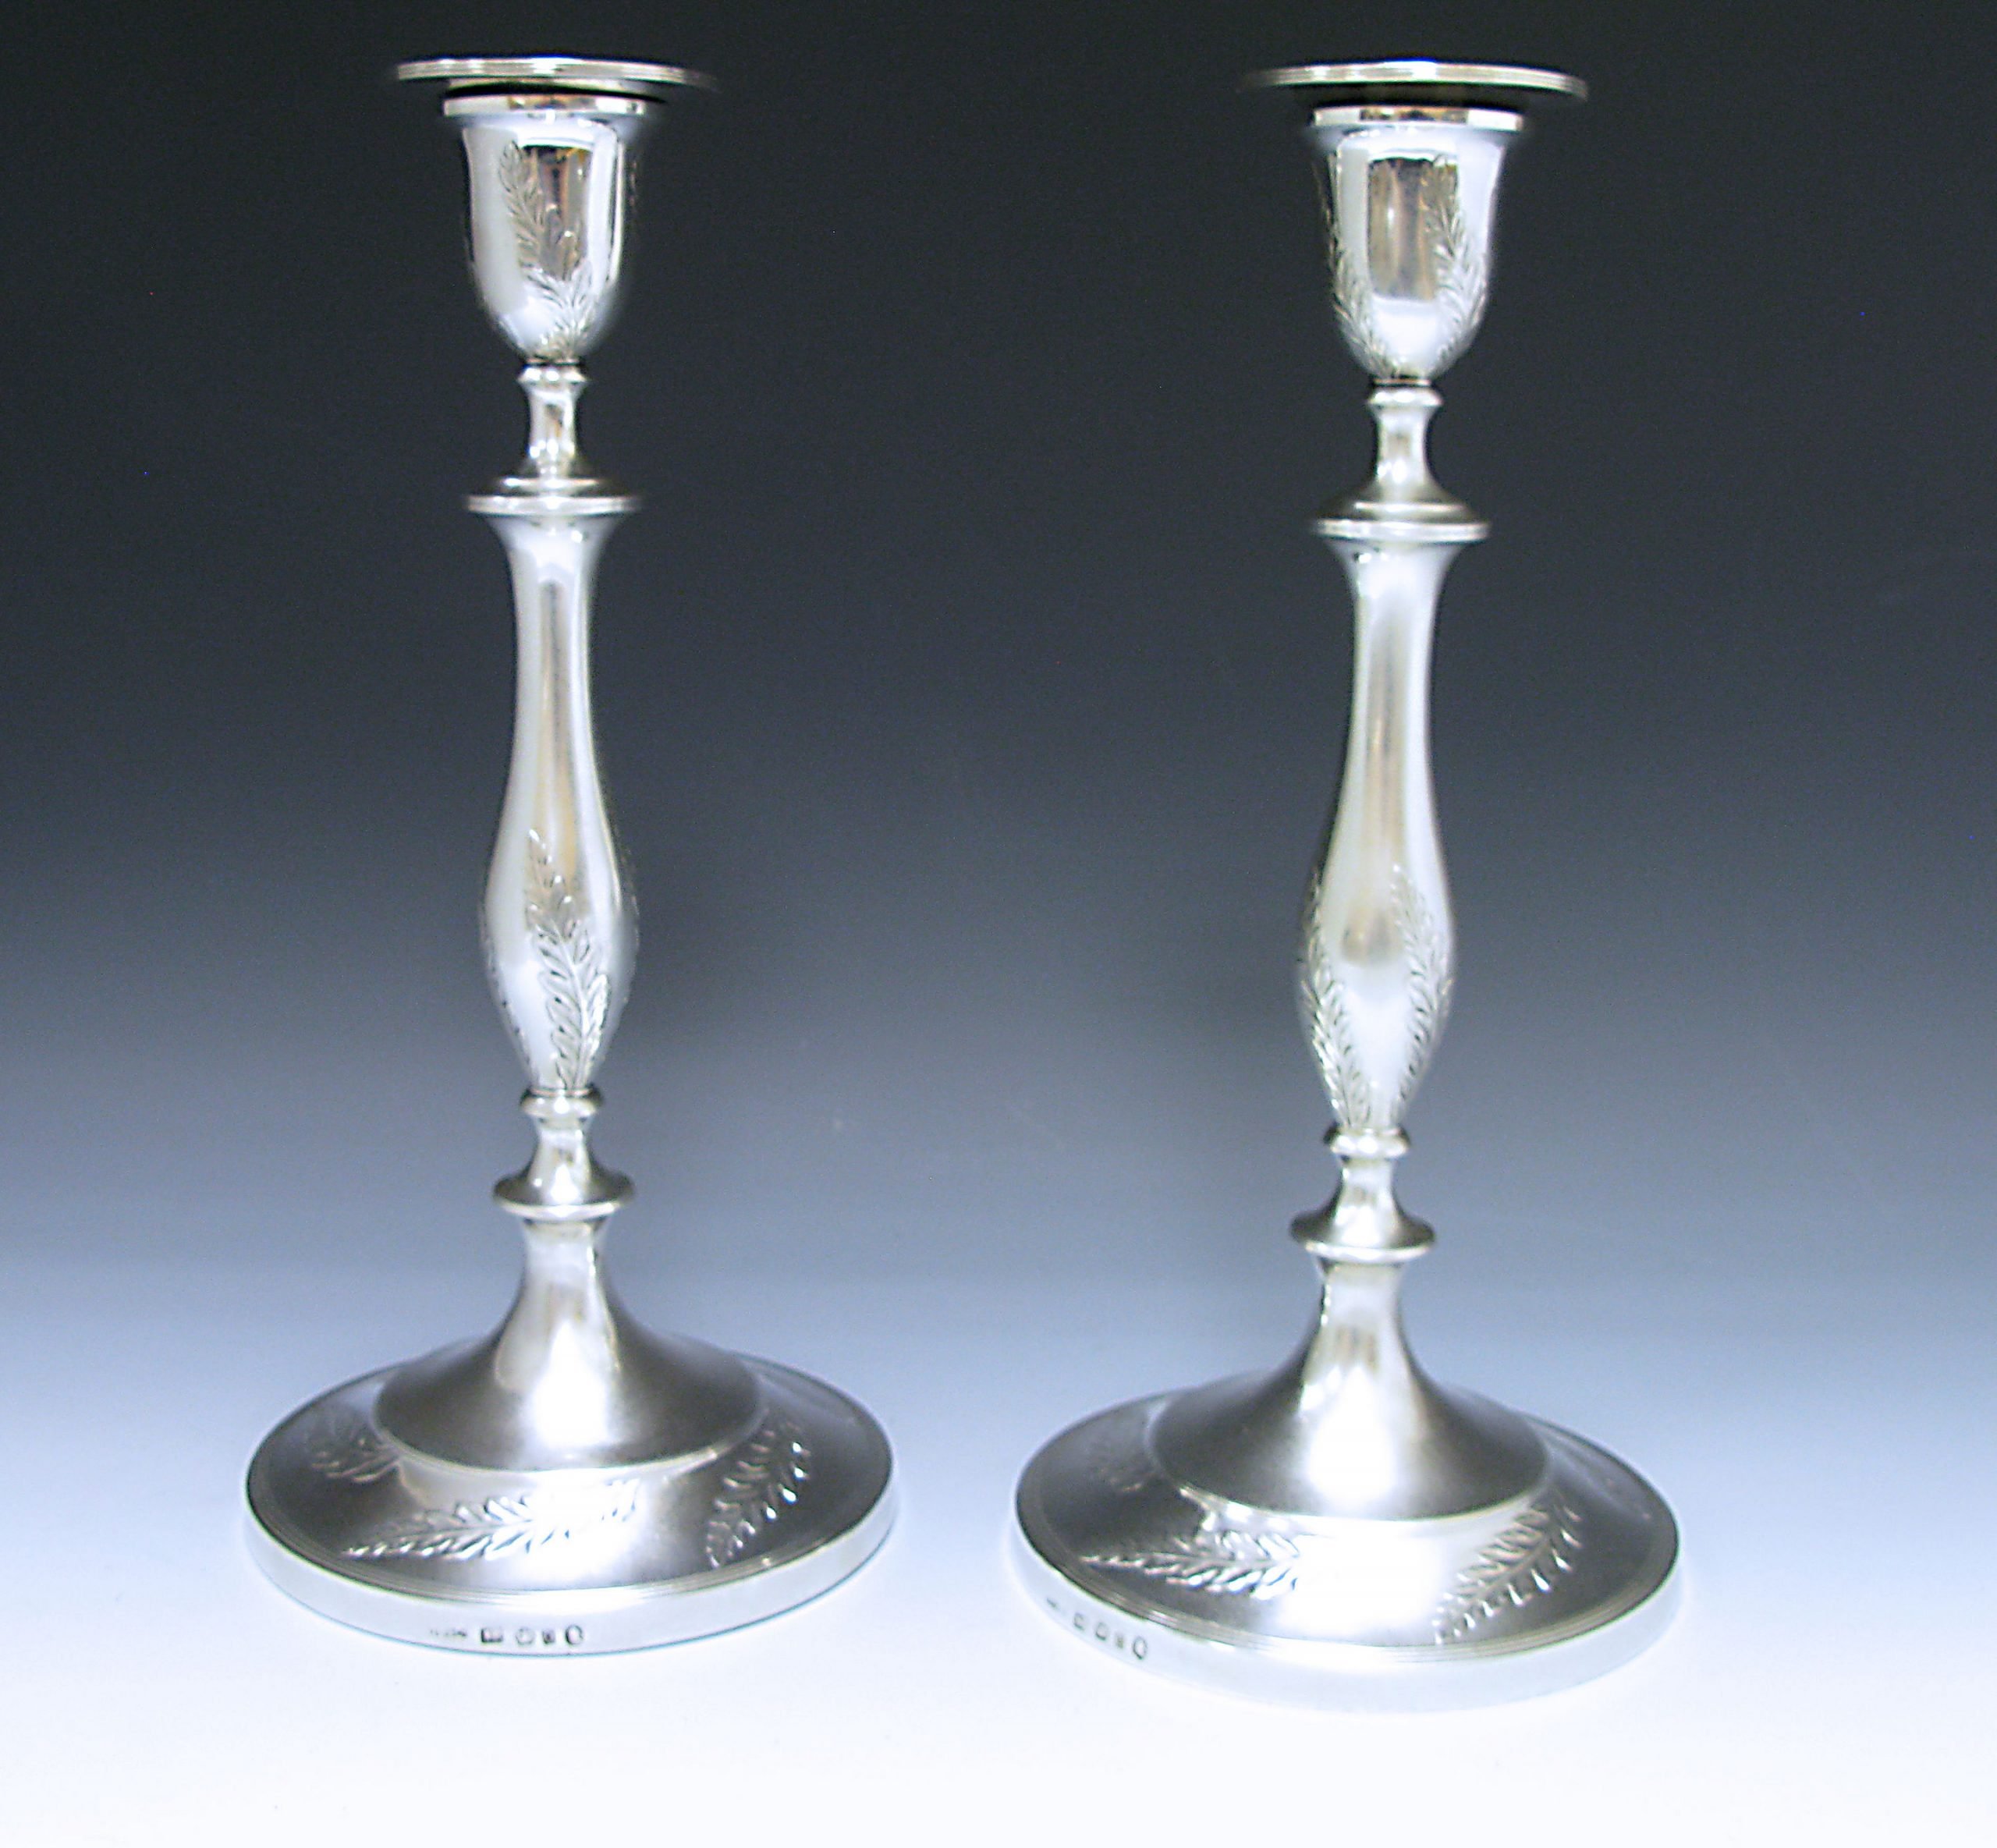 Pr George III  Antique Silver Candlesticks made in 1793 1